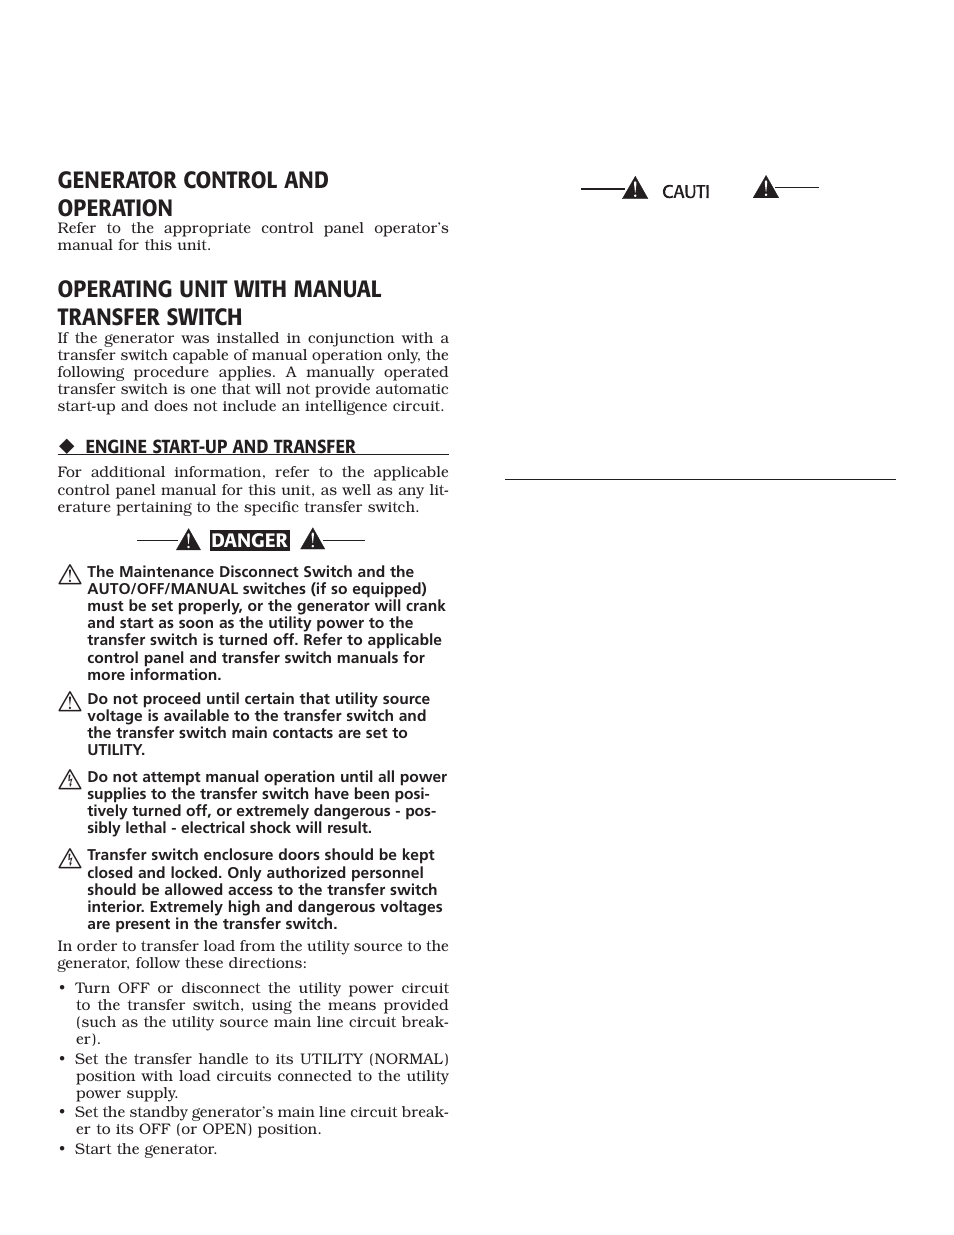 Generator control and operation, Operating unit with manual transfer switch | LG 30kW User Manual | Page 15 / 60